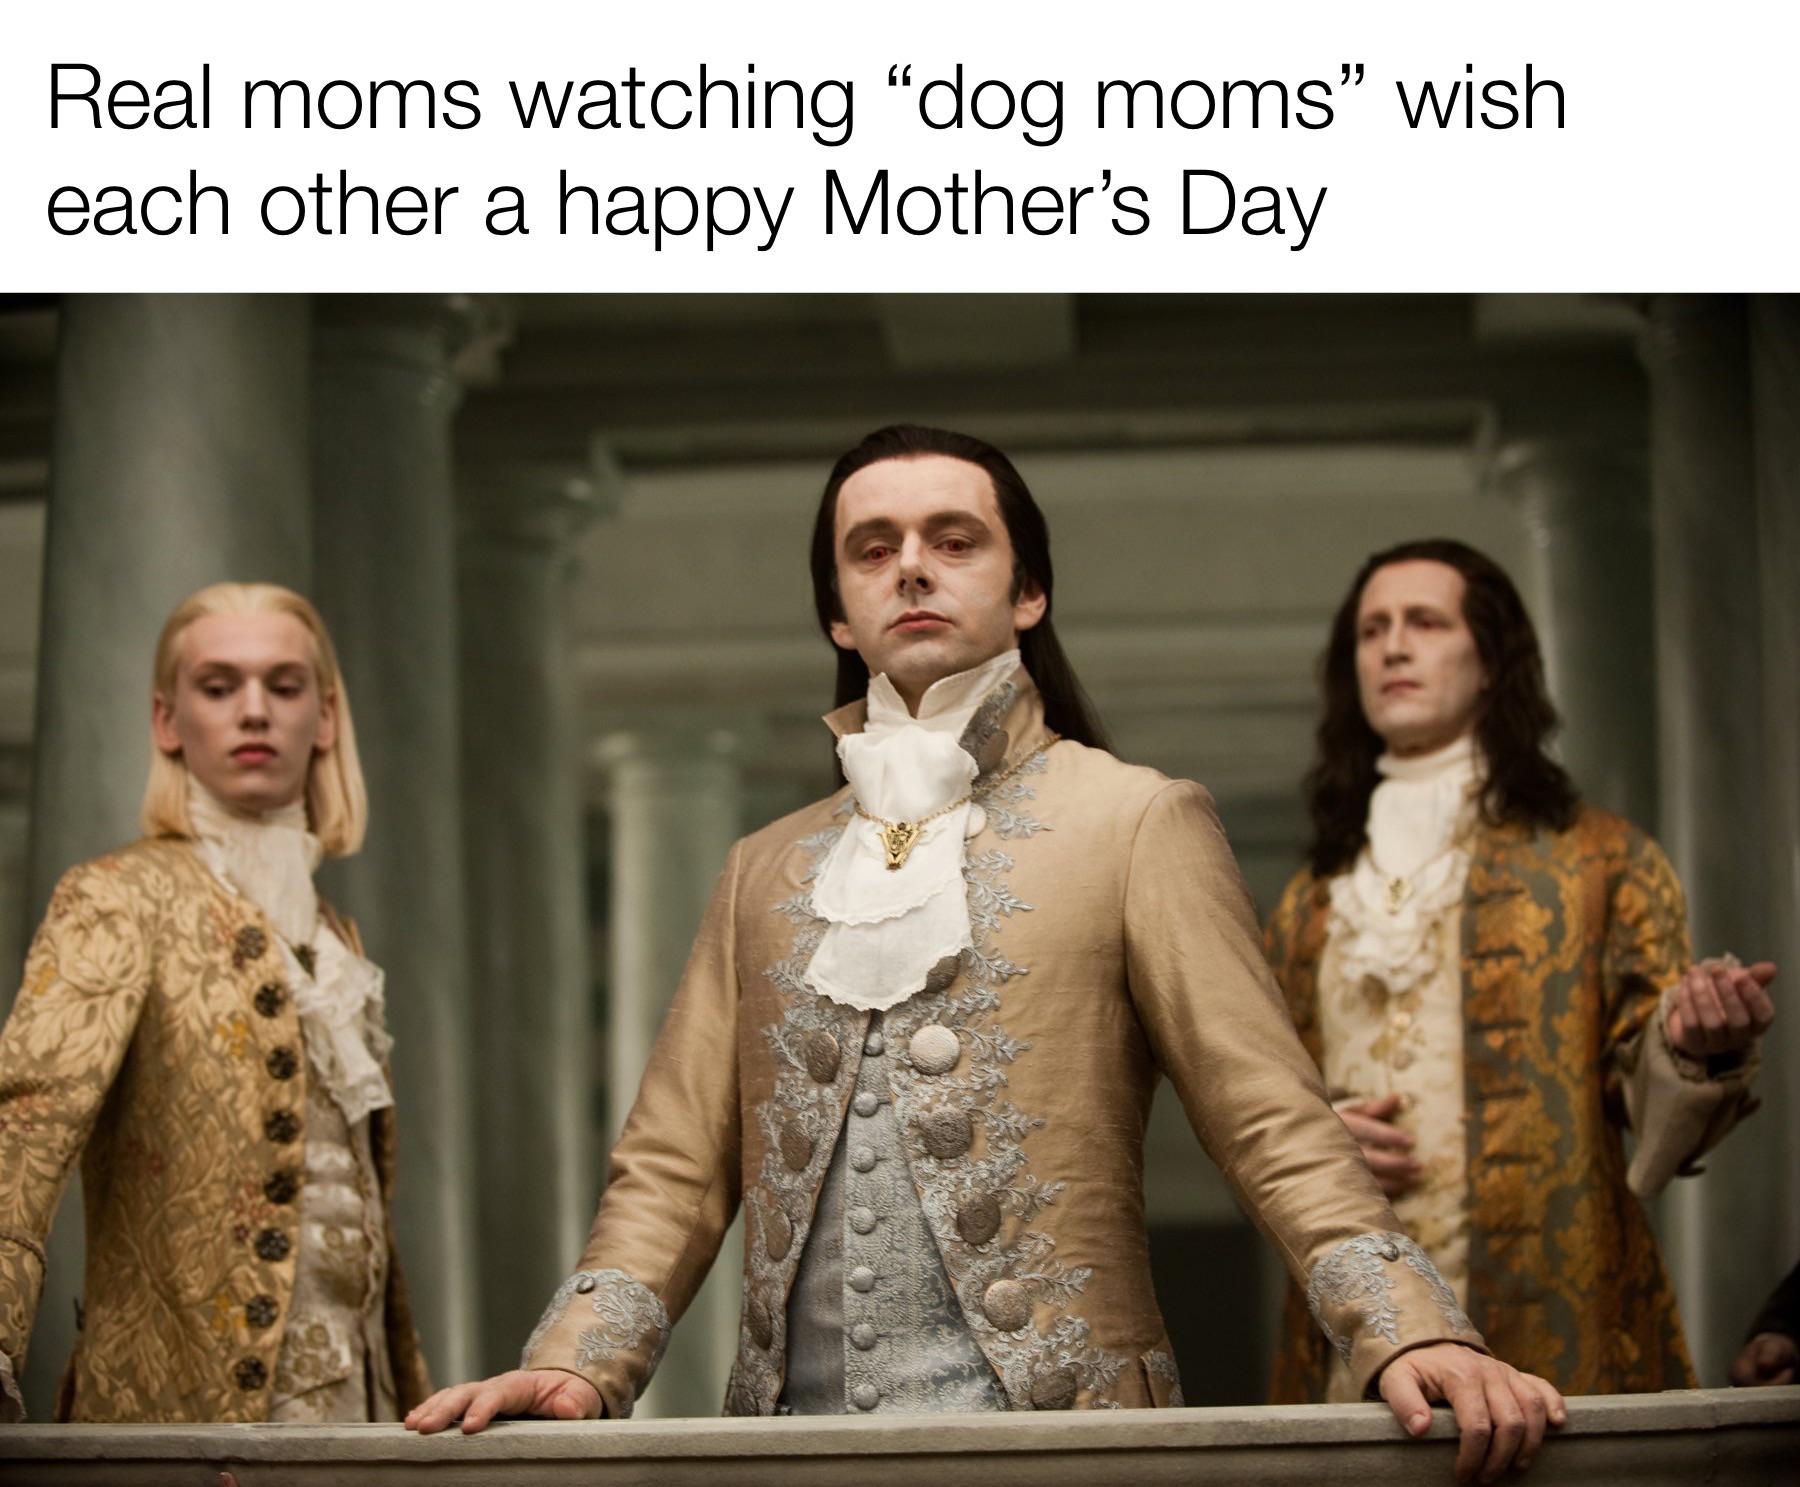 Funny memes - tesla owners meme gas shortage - Real moms watching dog moms wish each other a happy Mother's Day